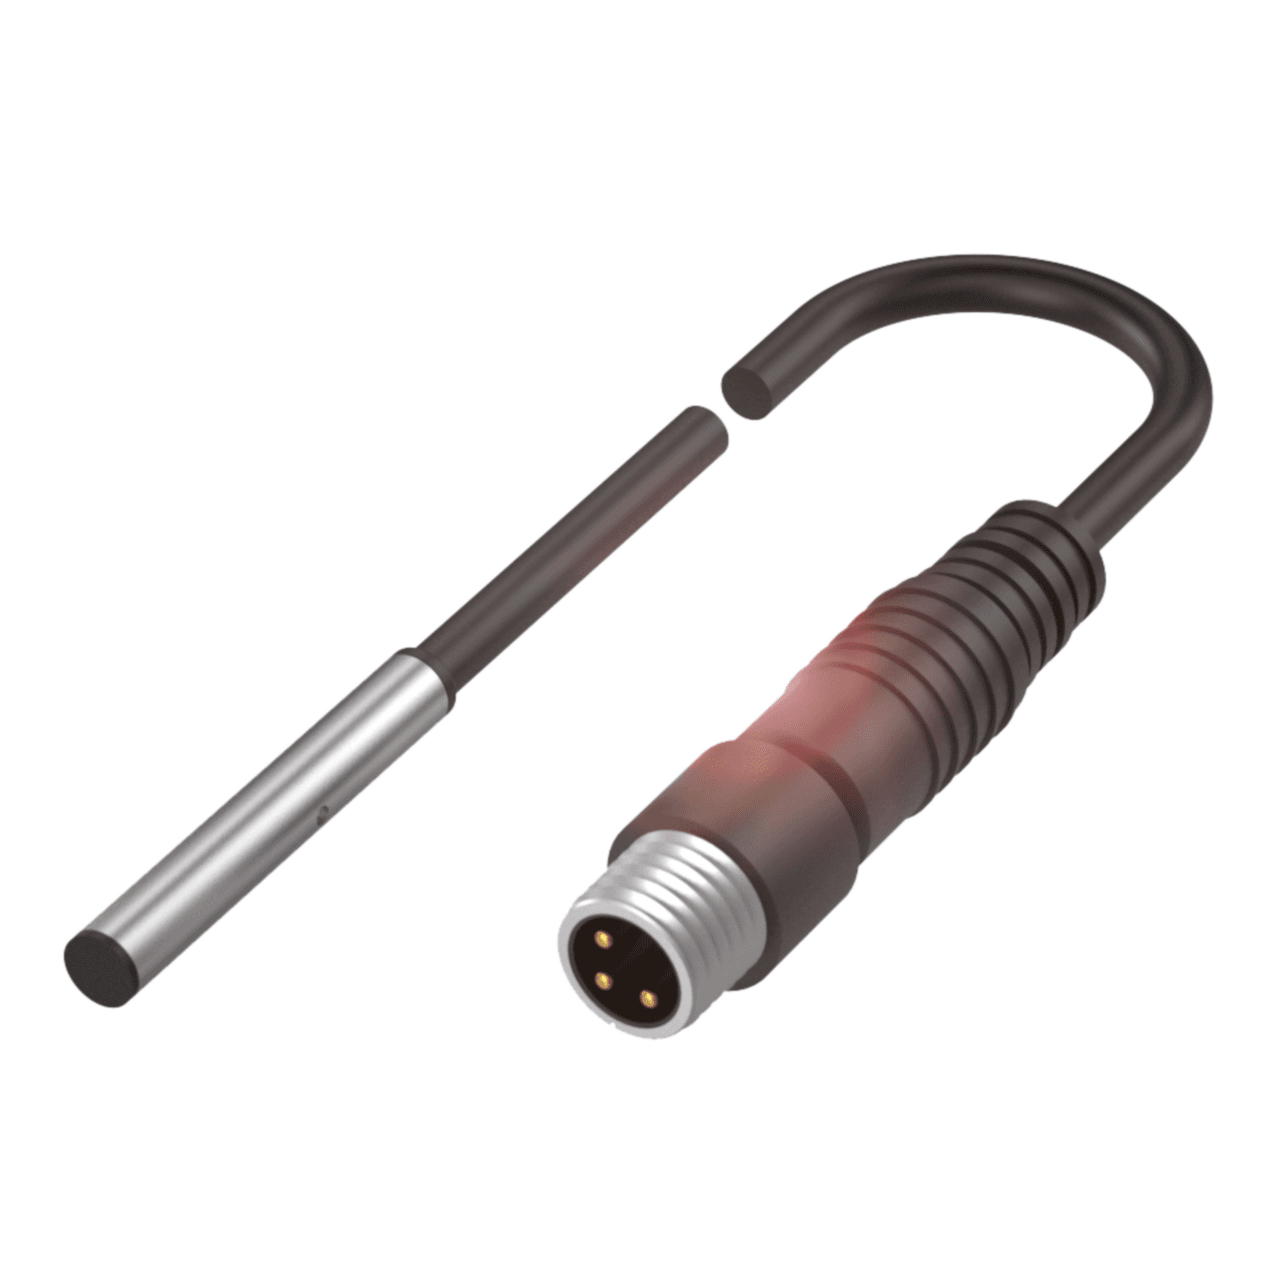 Balluff BES00J3 Inductive standard sensors with preferred type, Dimension: Ø 4 x 27 mm, Style: D4.0, Installation: for flush mounting, Range: 0.8 mm, Switching output: PNP Normally open (NO), Switching frequency: 5000 Hz, Housing material: Stainless steel